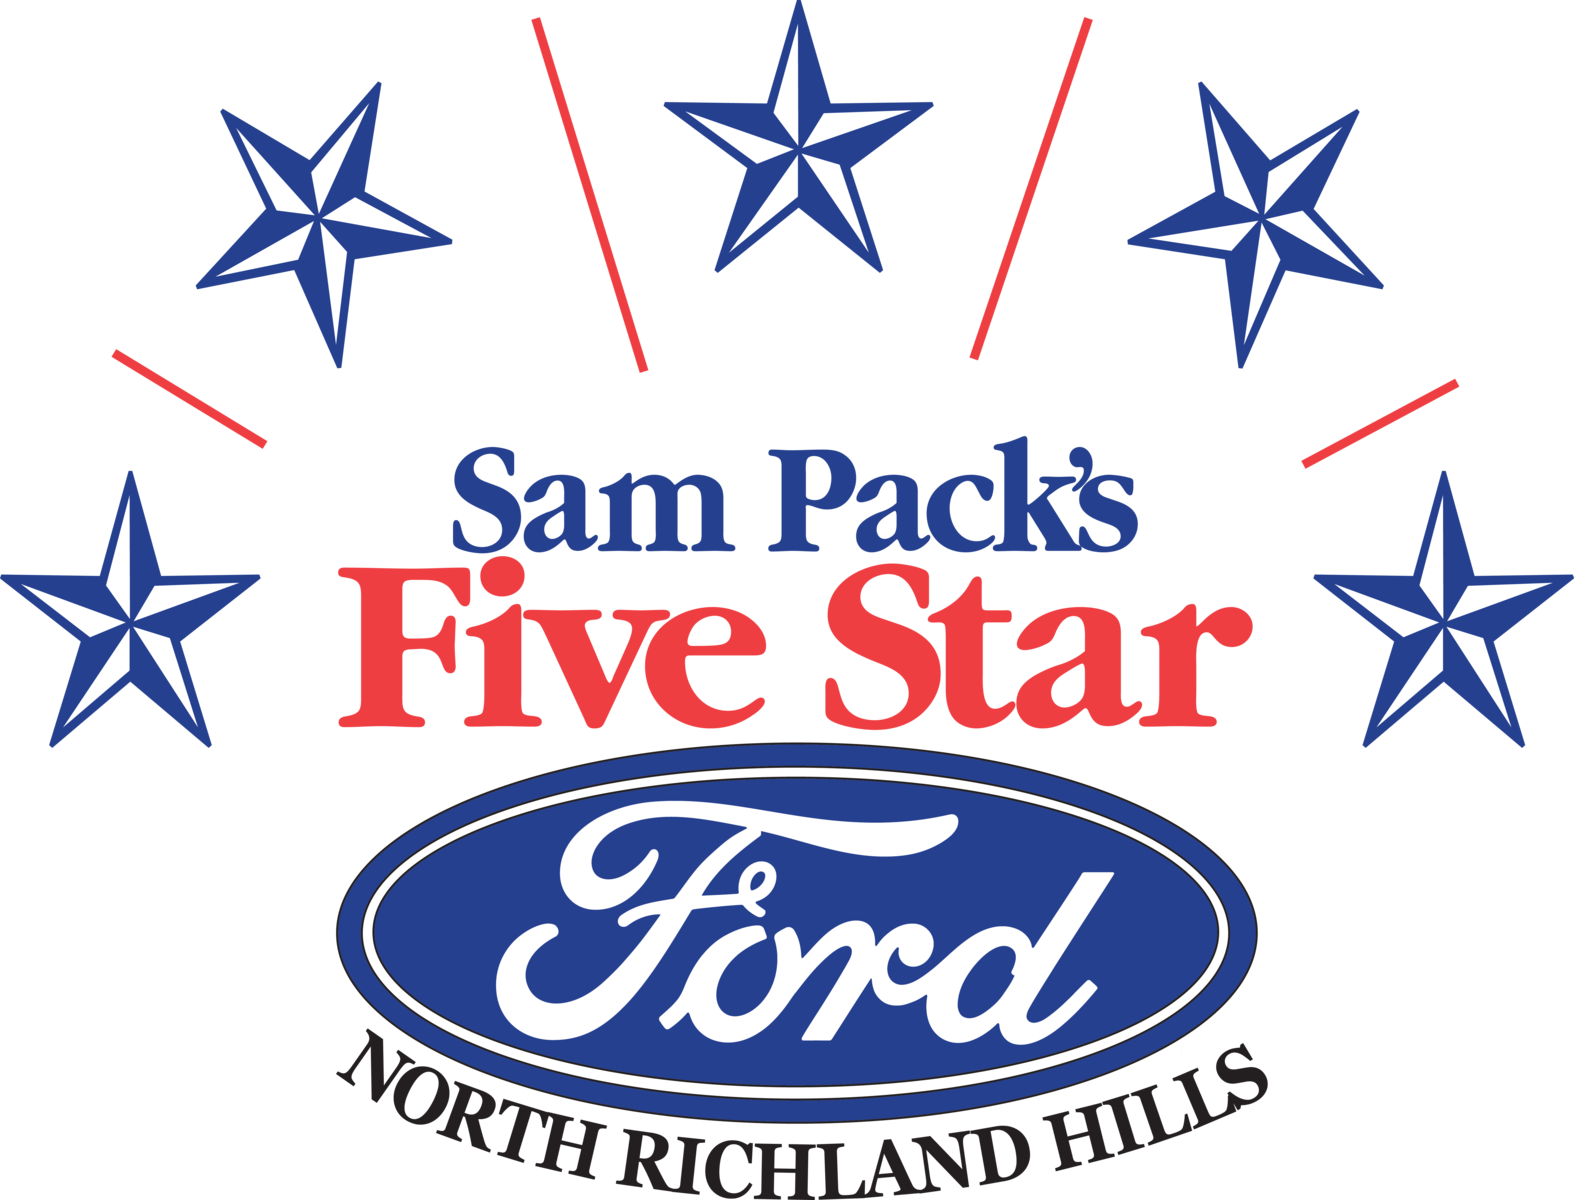 Five Star Ford North Richland Hills Pic 8589215054905640999 1600x1200 